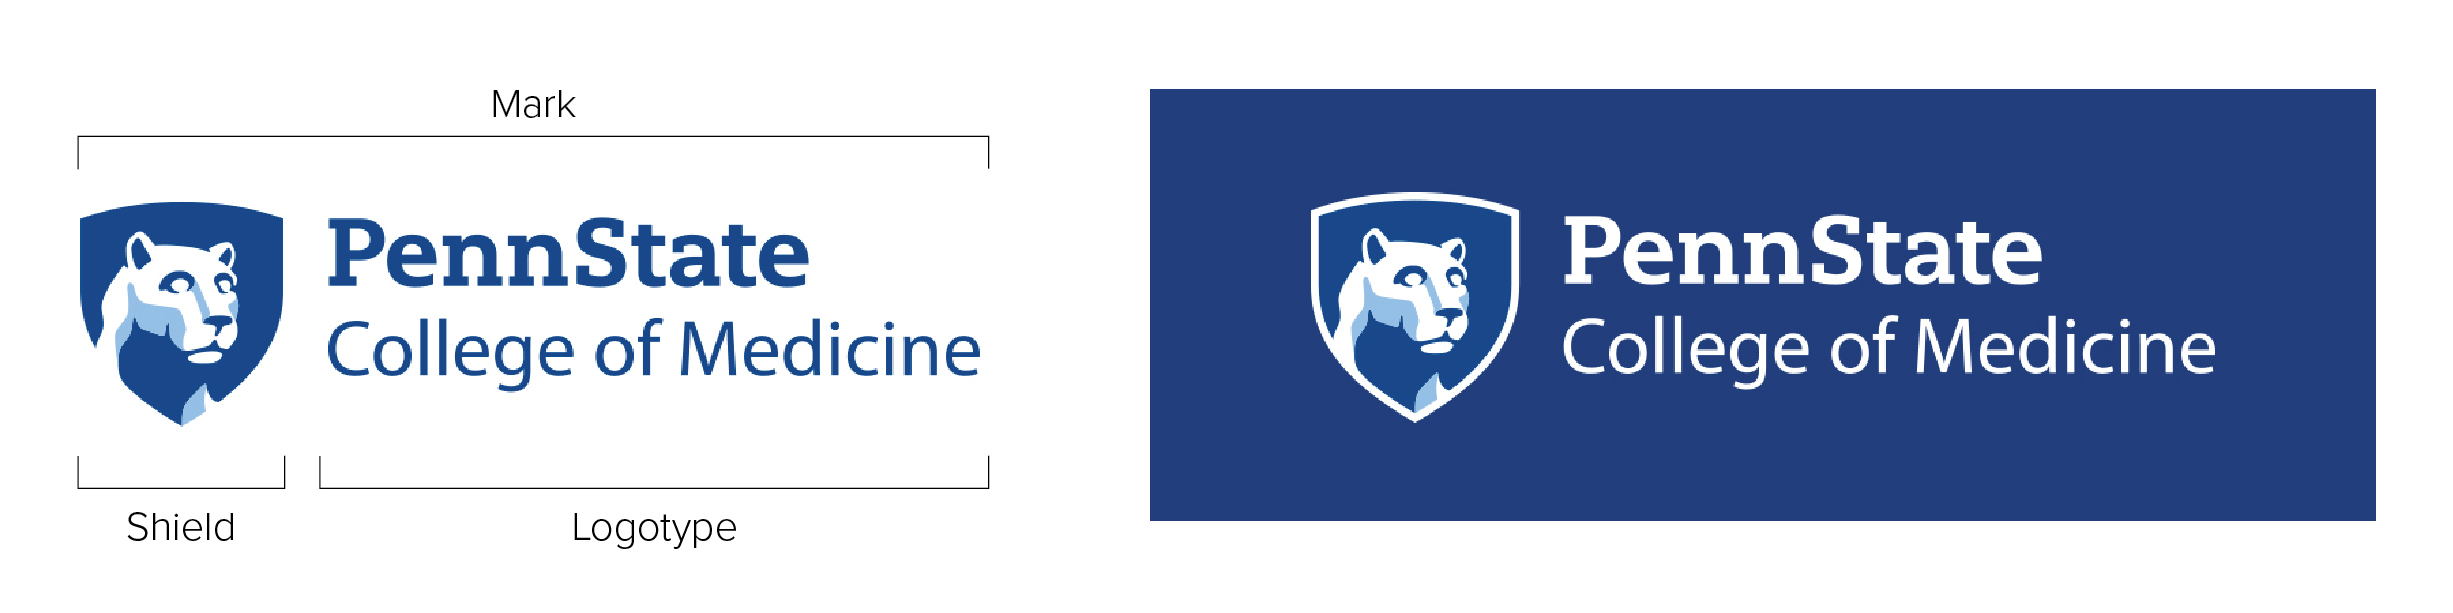 Penn State College of Medicine mark with shield logo and logotype; regular and reversed versions shown.